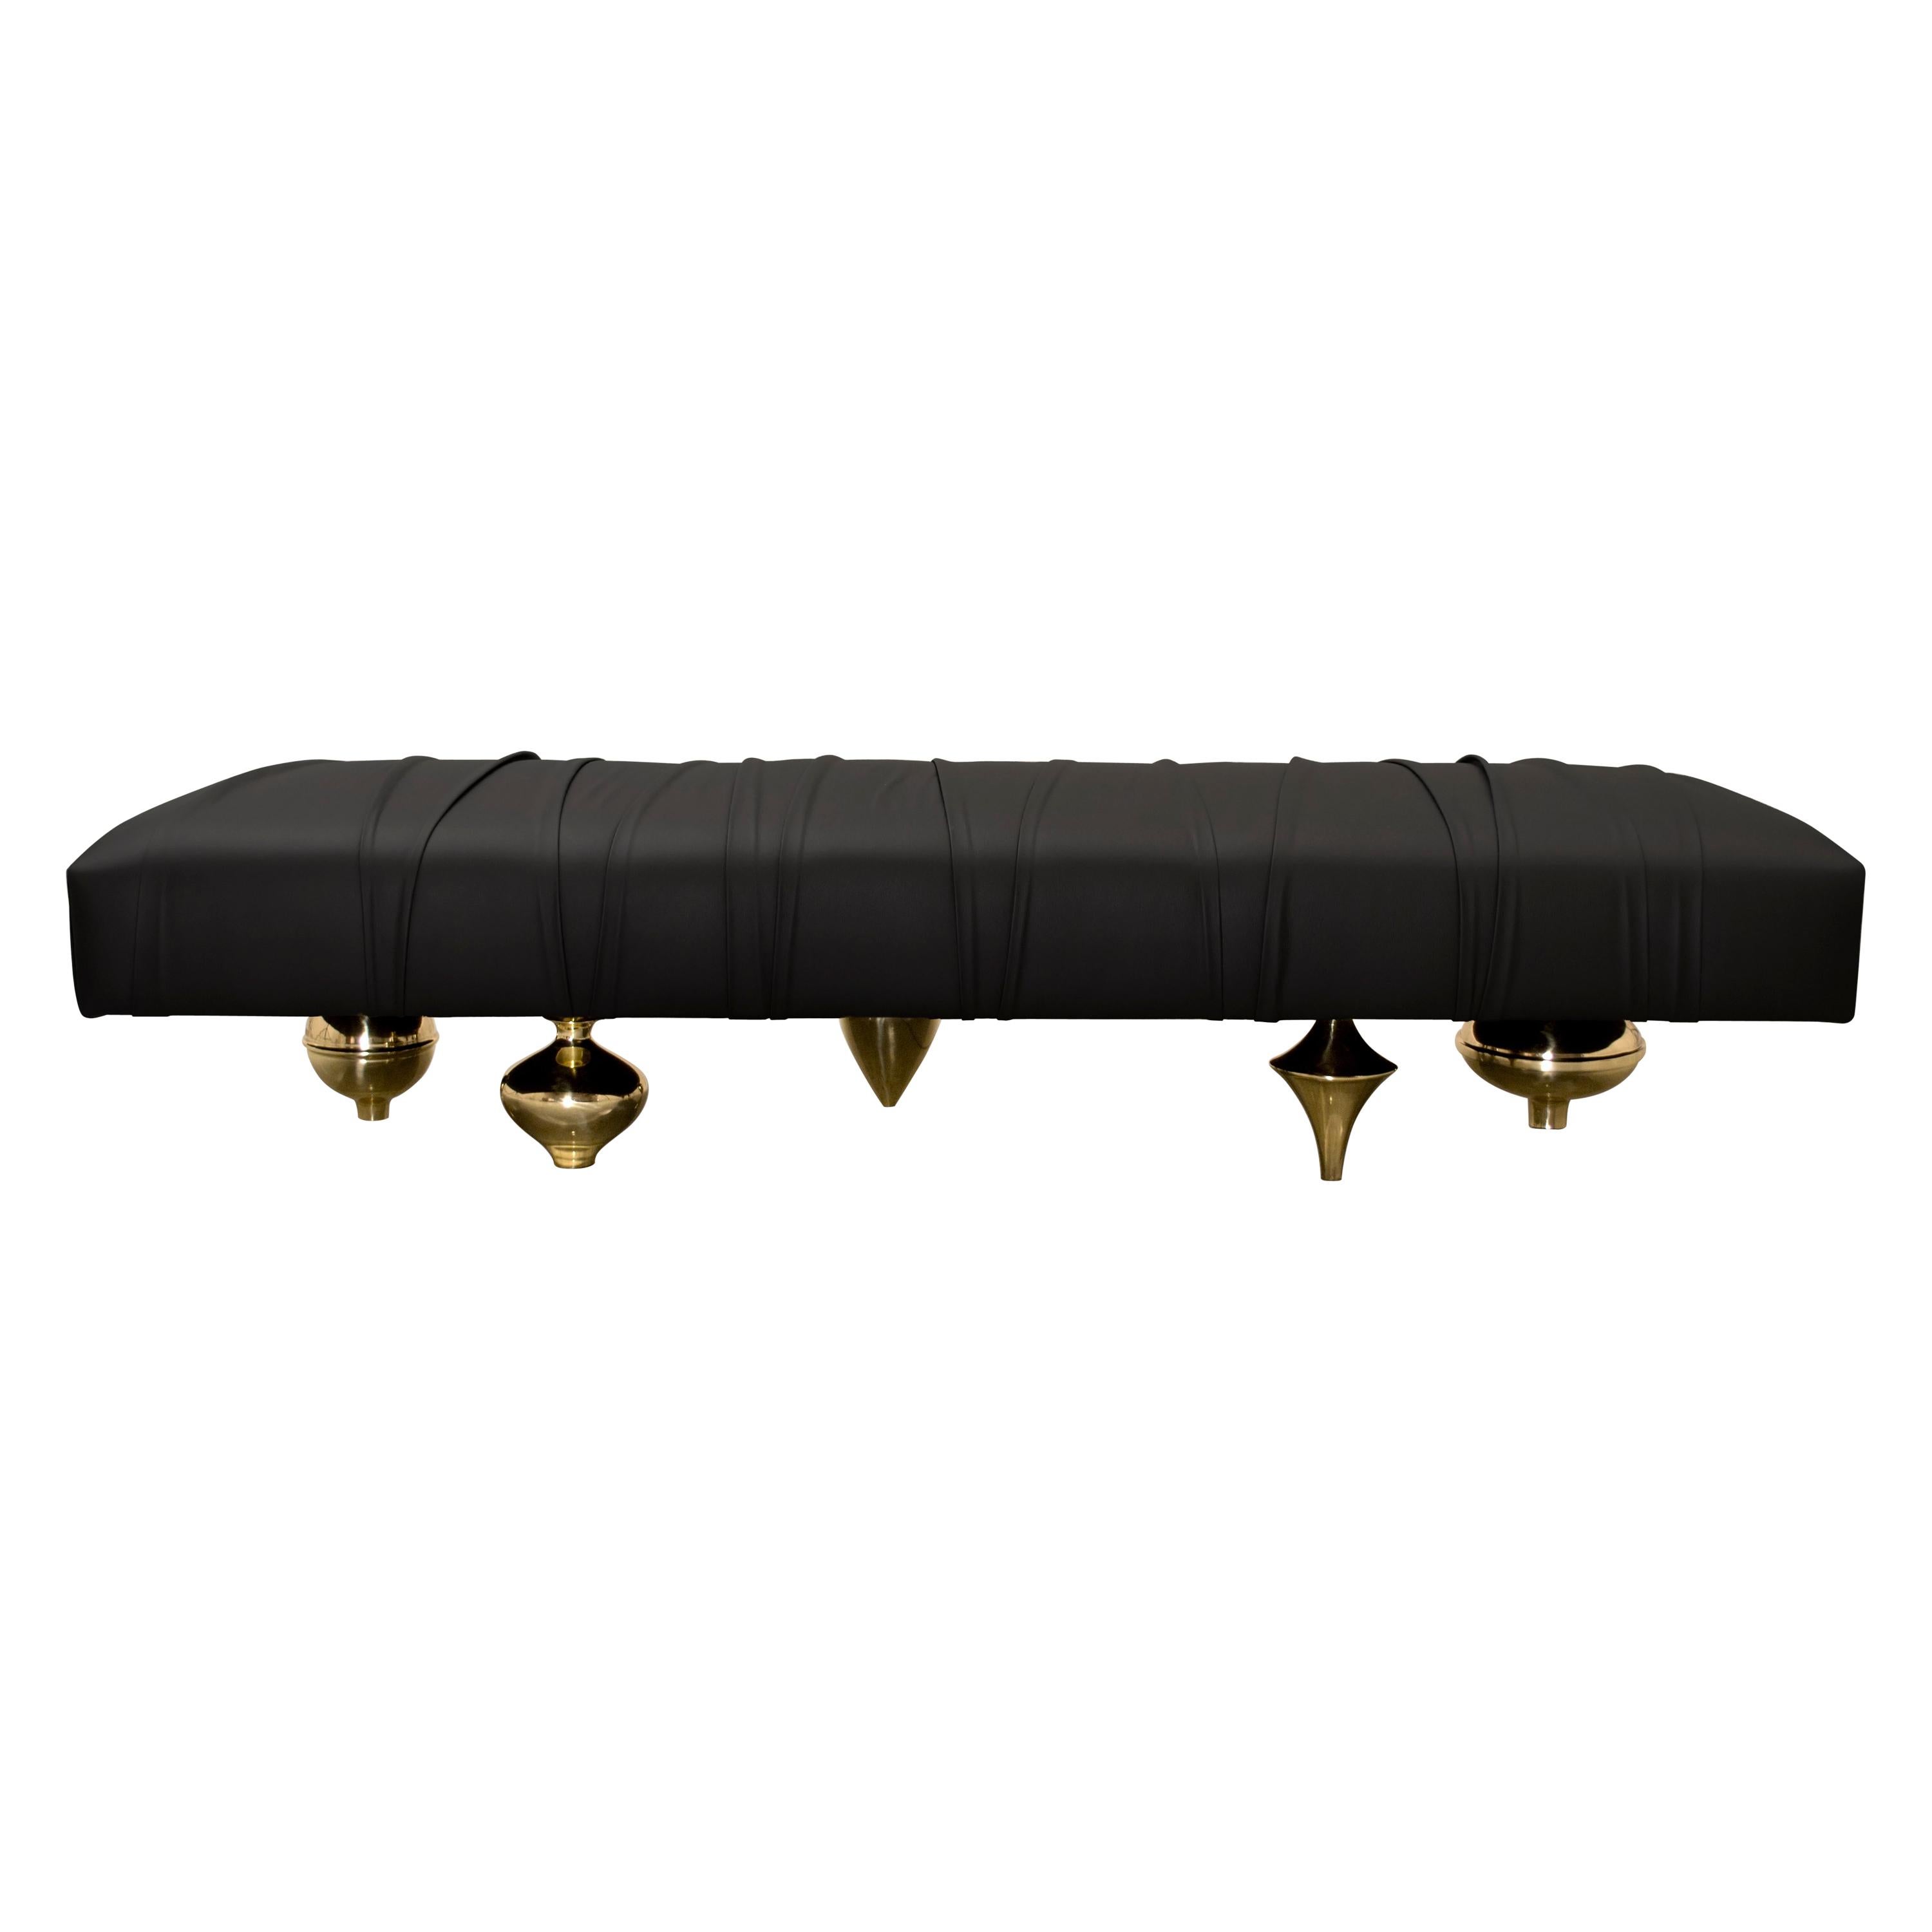 II Pezzo I "Bench" in Upholstered Fine Leather and Gold Plated Brass